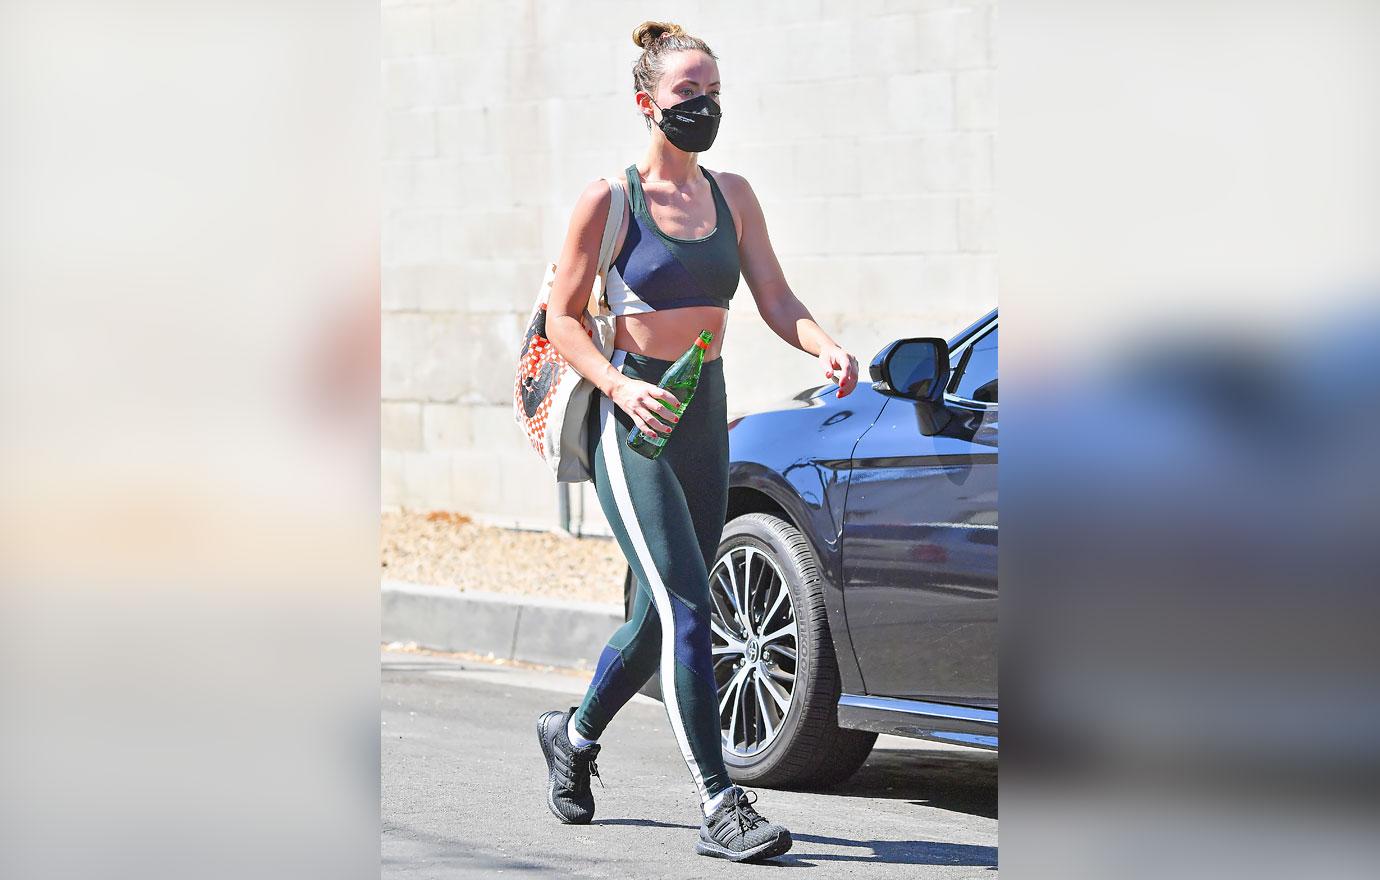 Olivia Wilde Wears Matching Athleisure For Gym Workout: Photos